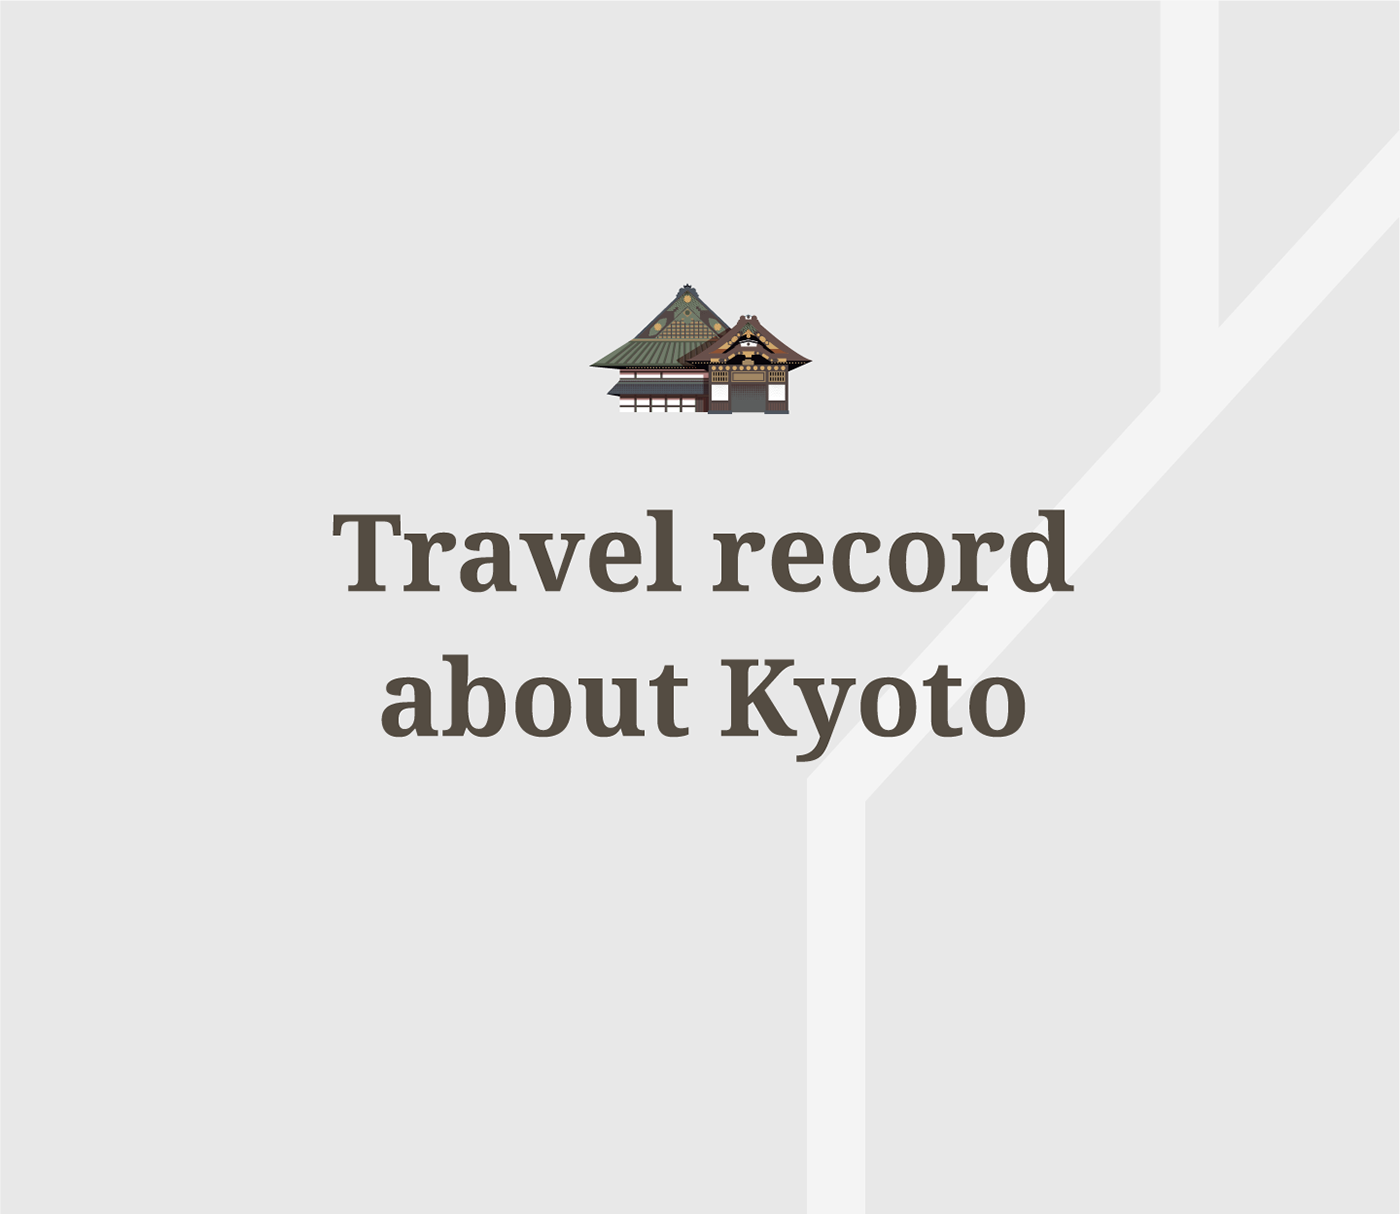 kyoto info graphic map bus Guide down